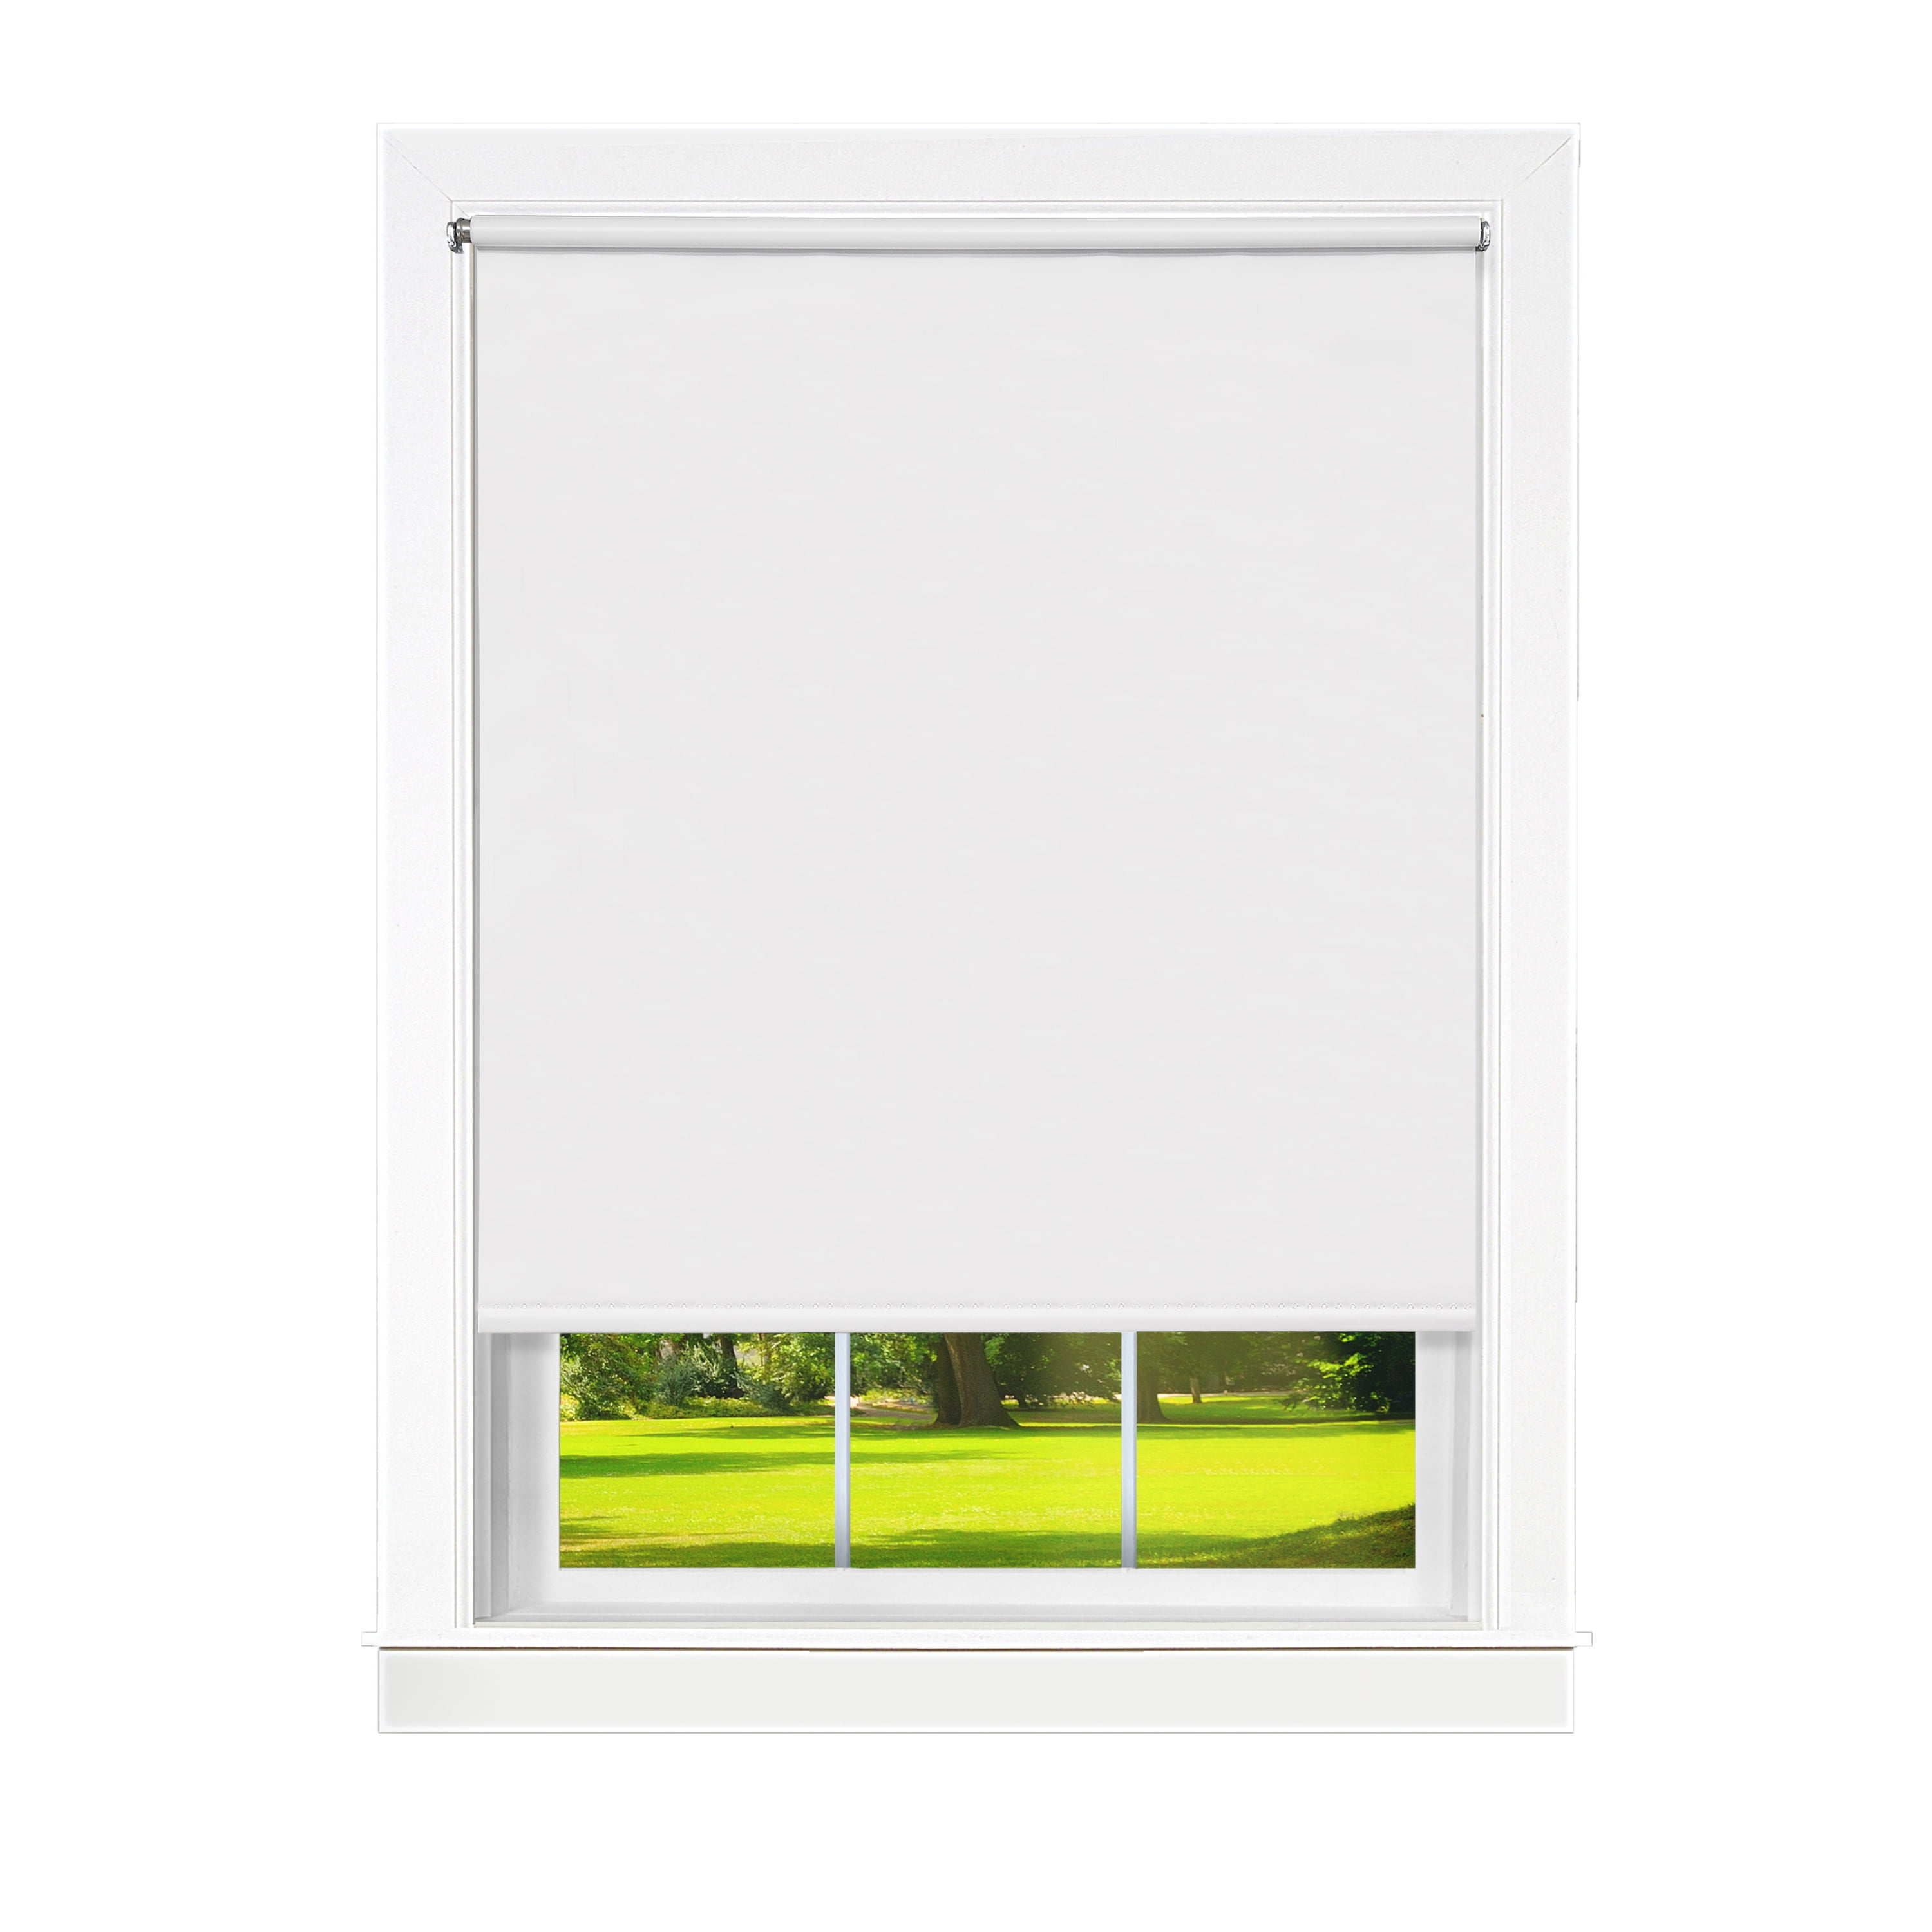 Picture of Achim TRL736WH06 73 x 72 in. Cords Free Tear Down Light Filtering Window Shade, White